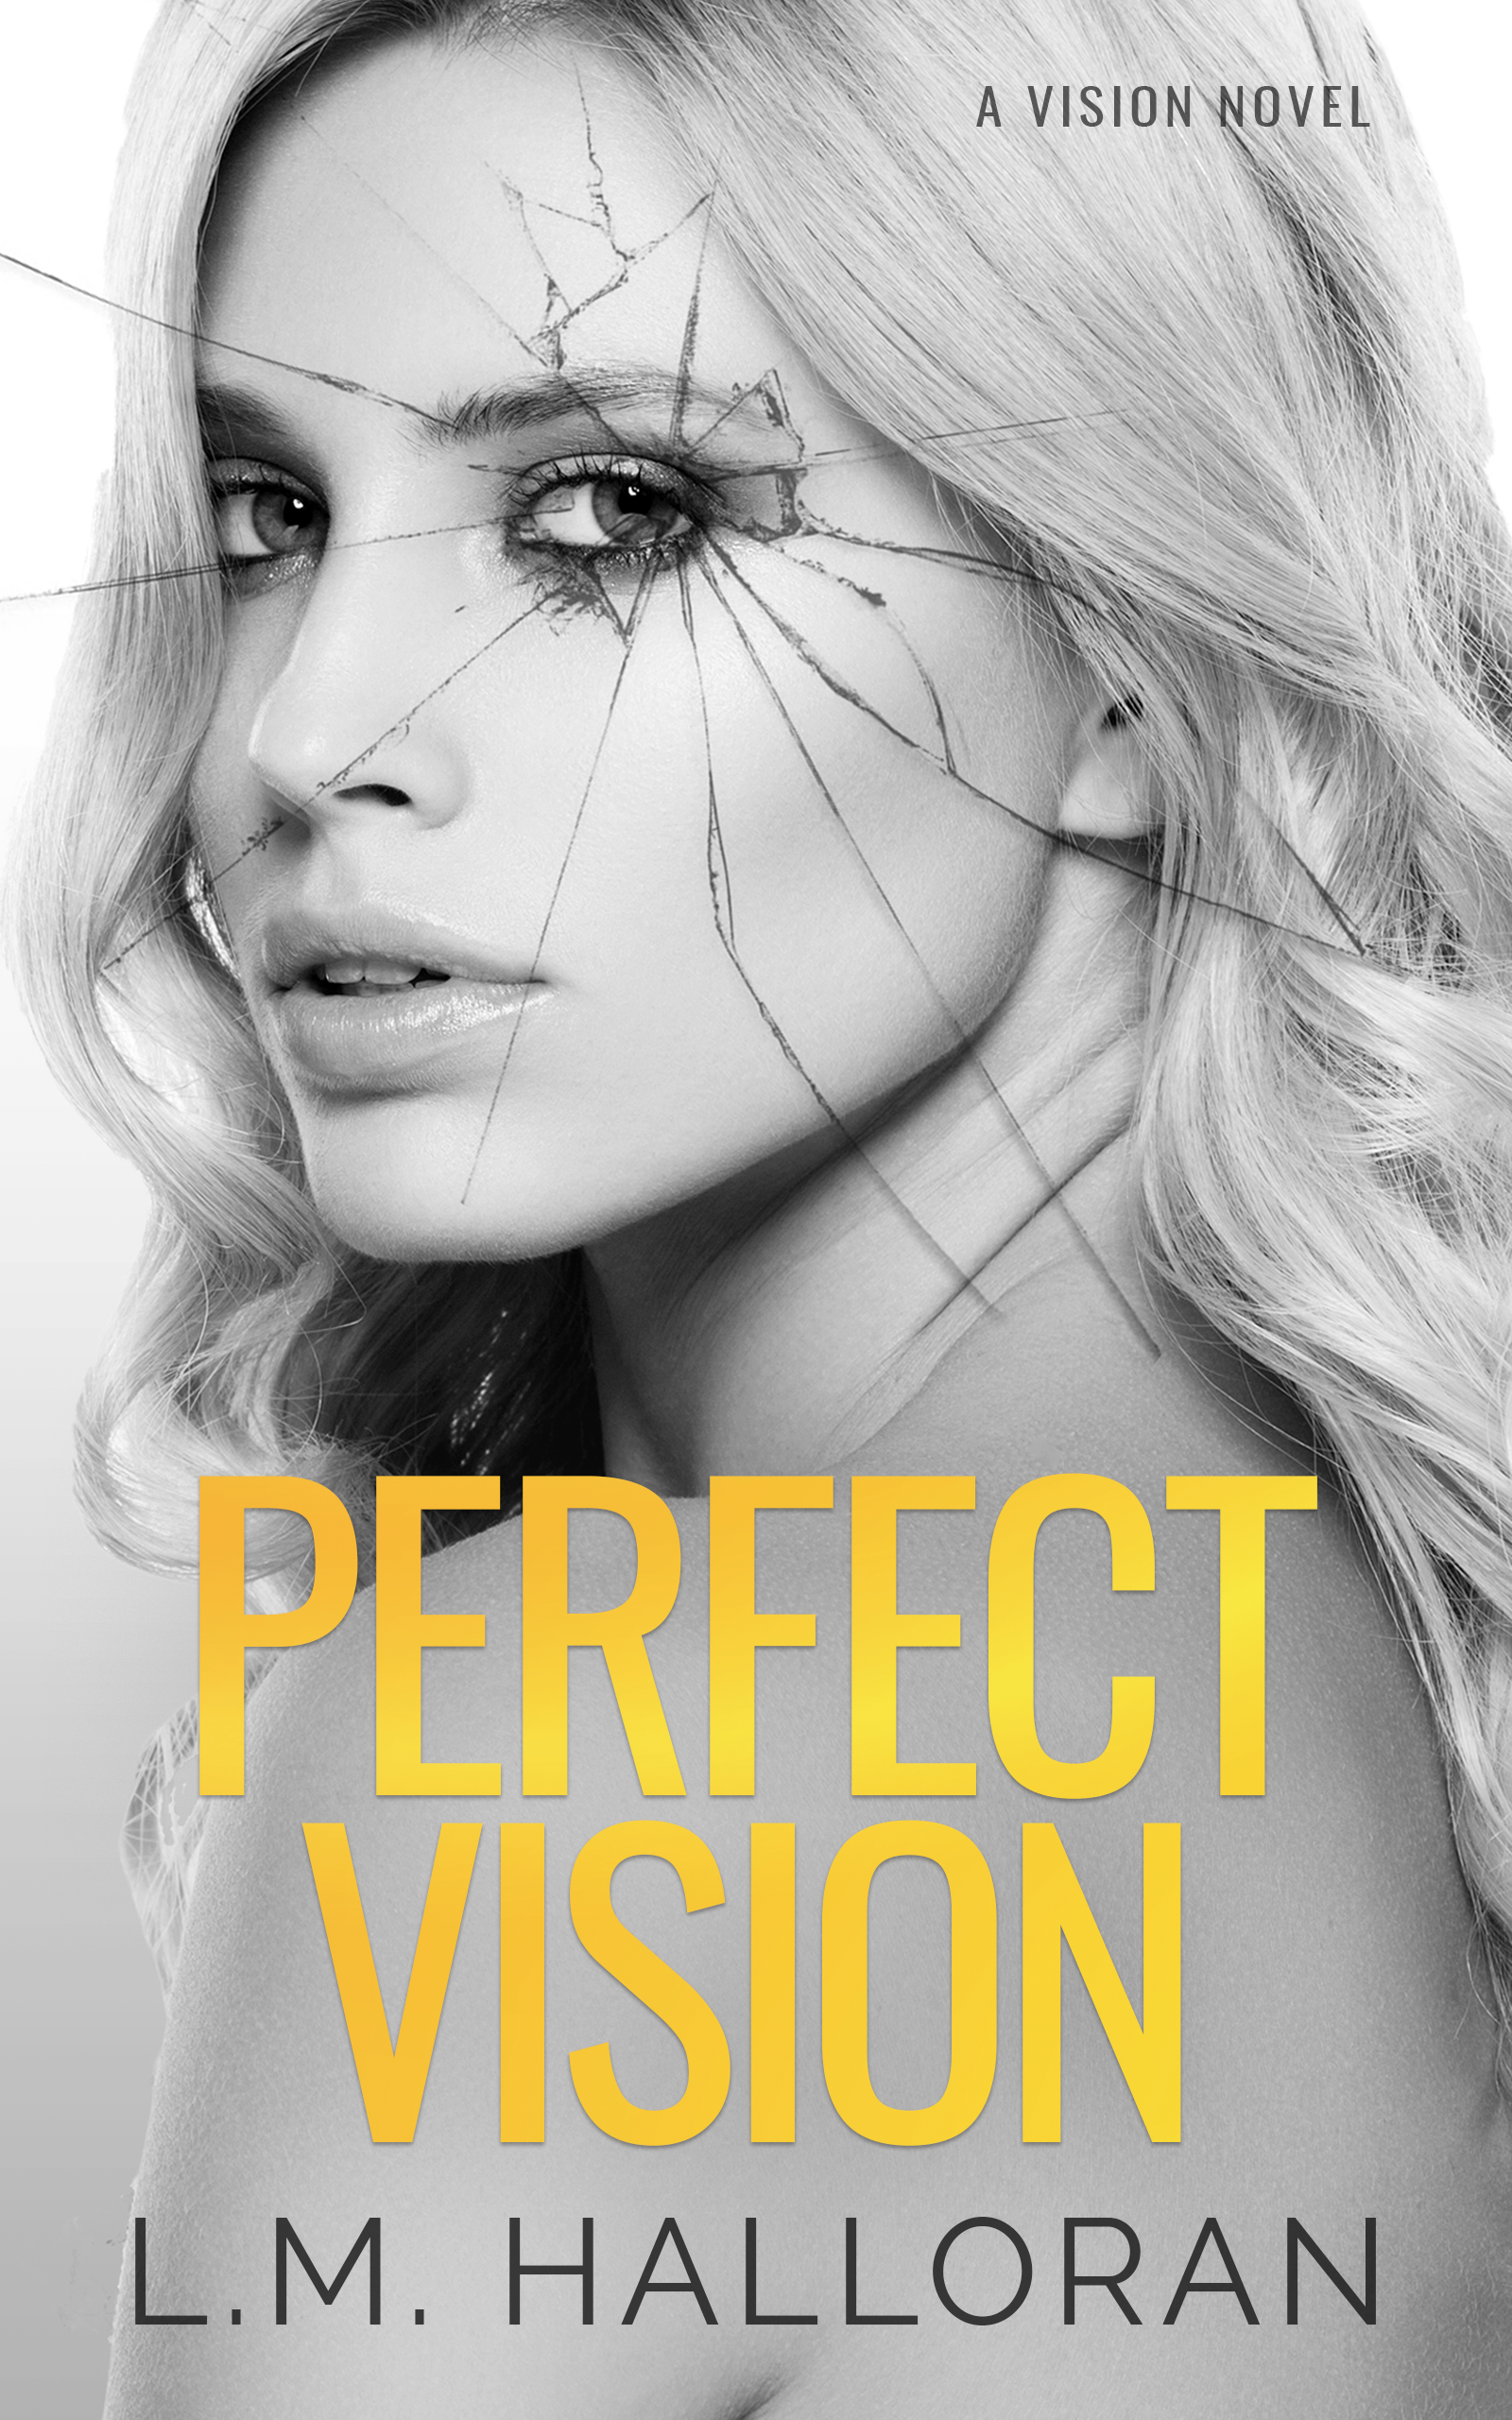 Perfect Vision by L.M. Halloran [Review]